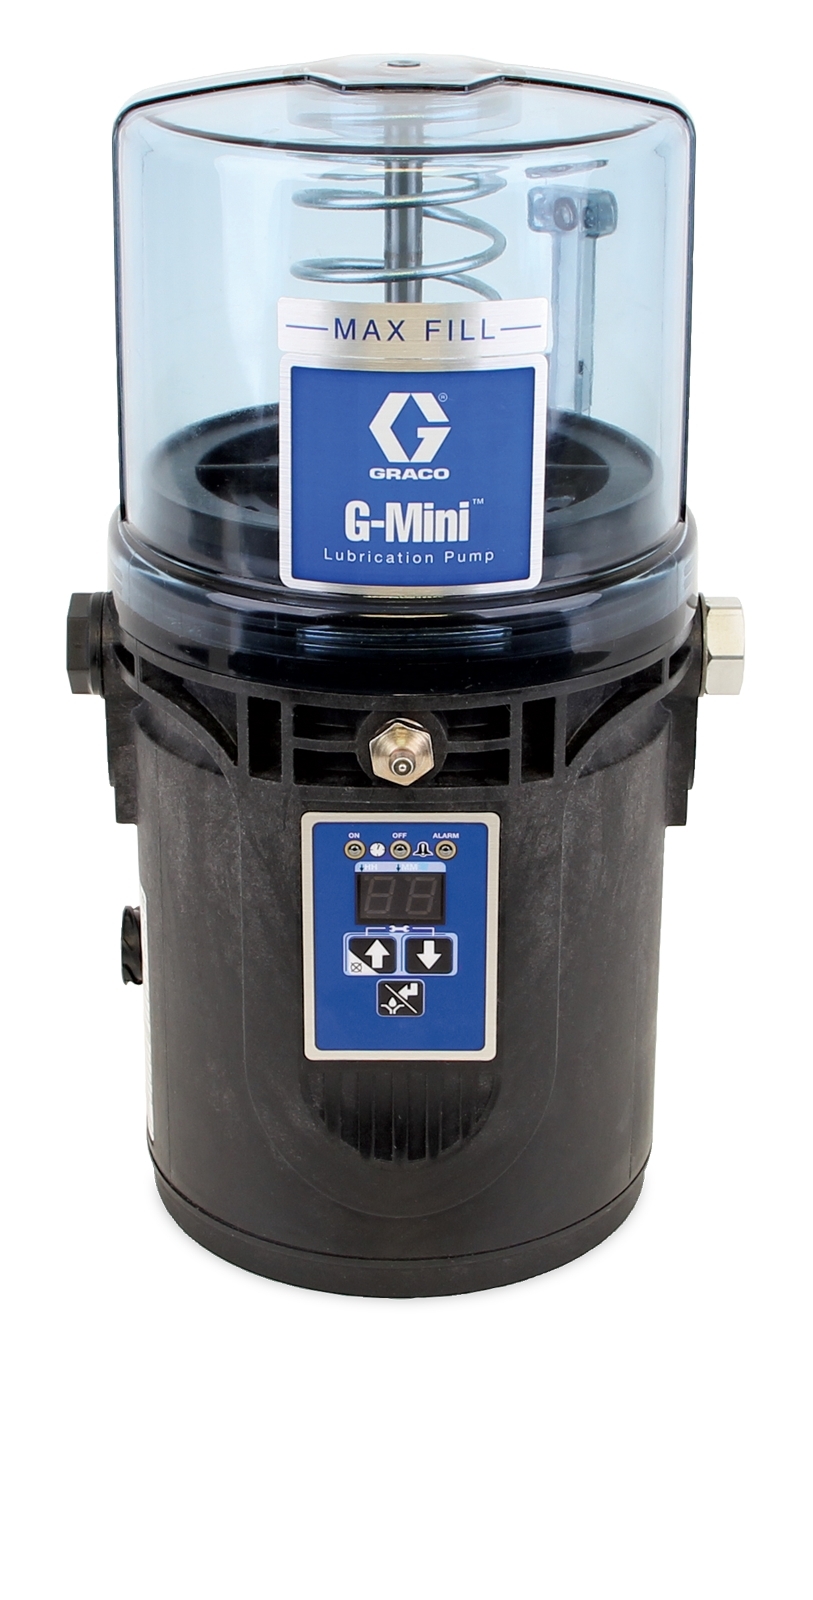 Graco's G-Mini compact pump has an optional built-in heater that automatically turns on at low temperatures.